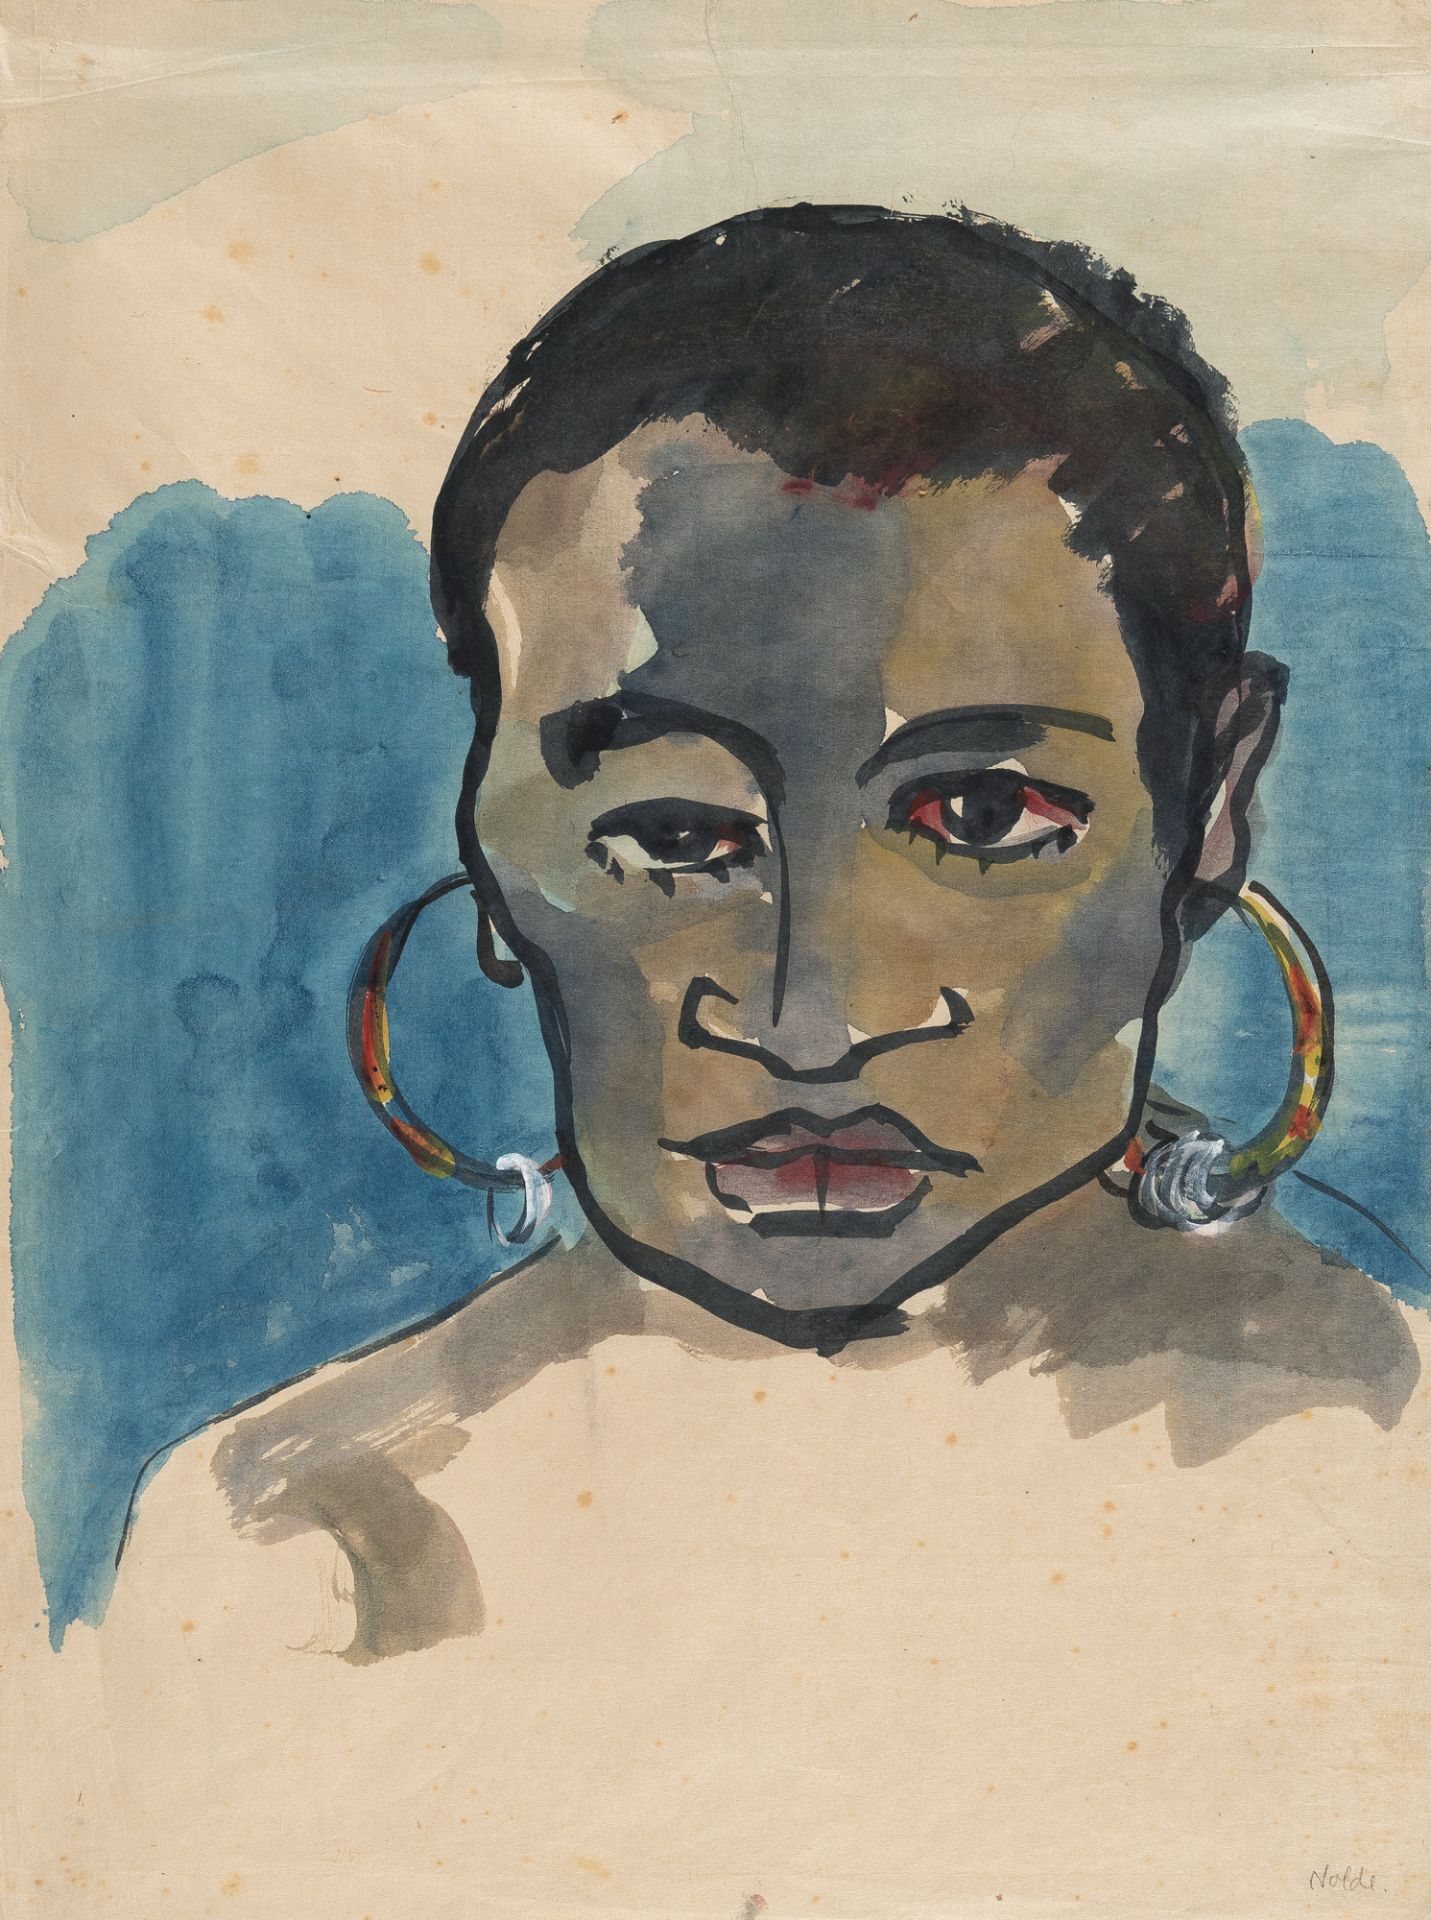 Emil Nolde (1867 Nolde - Seebüll 1956), “Papua woman”Watercolour and Indian ink on Japanese laid